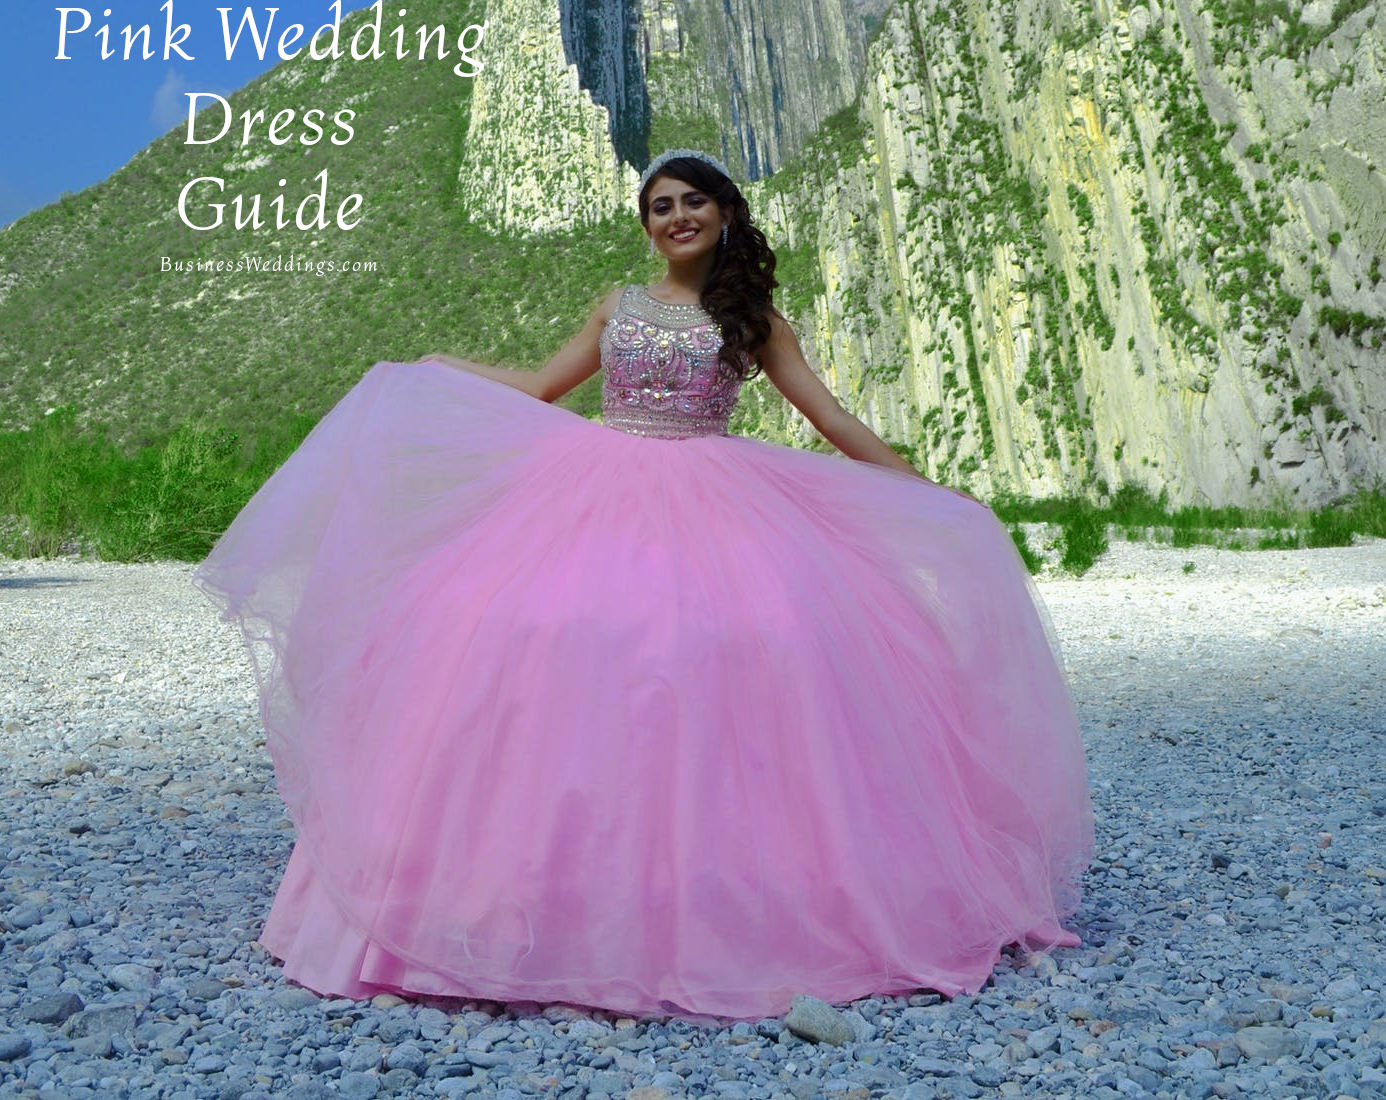 Pink Wedding Dresses Are For The Ultra Feminine Bride!